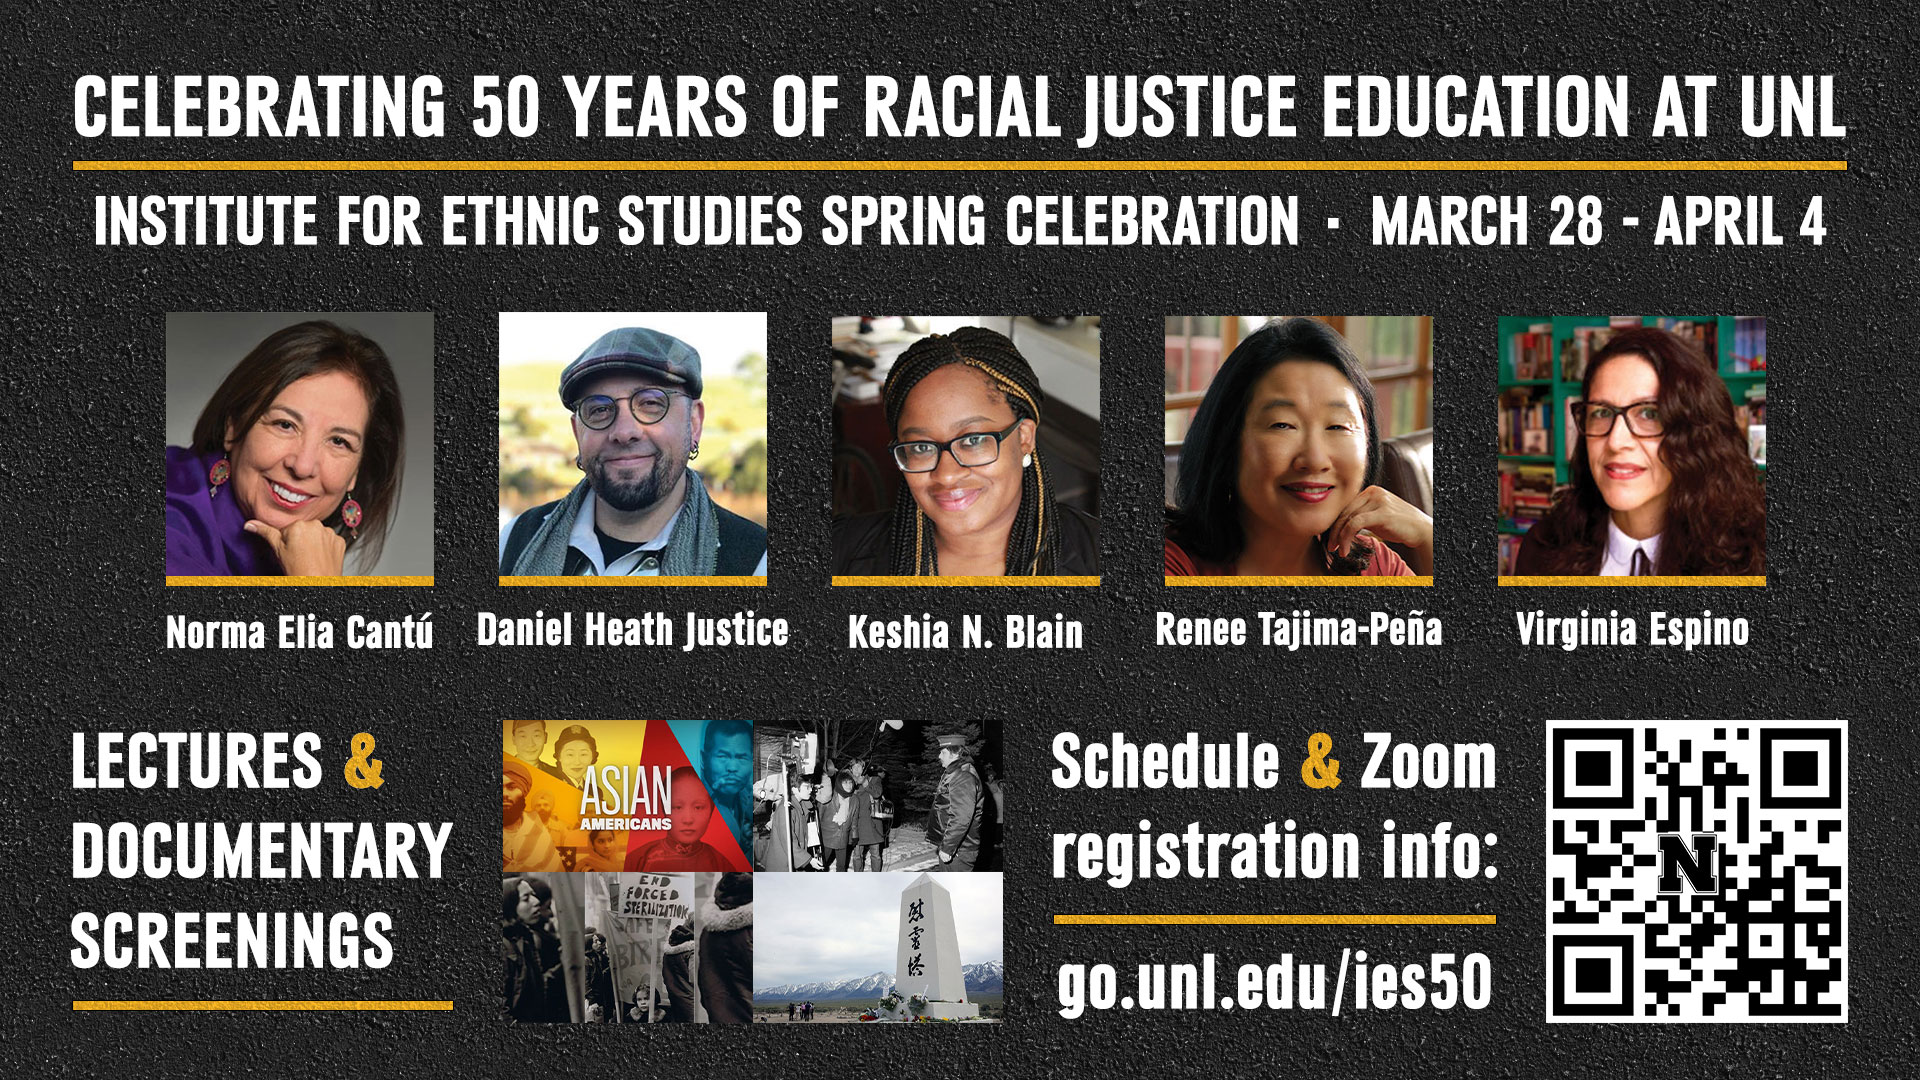 Photo Credit: IES Celebration of 50 Years of Racial Justice Education